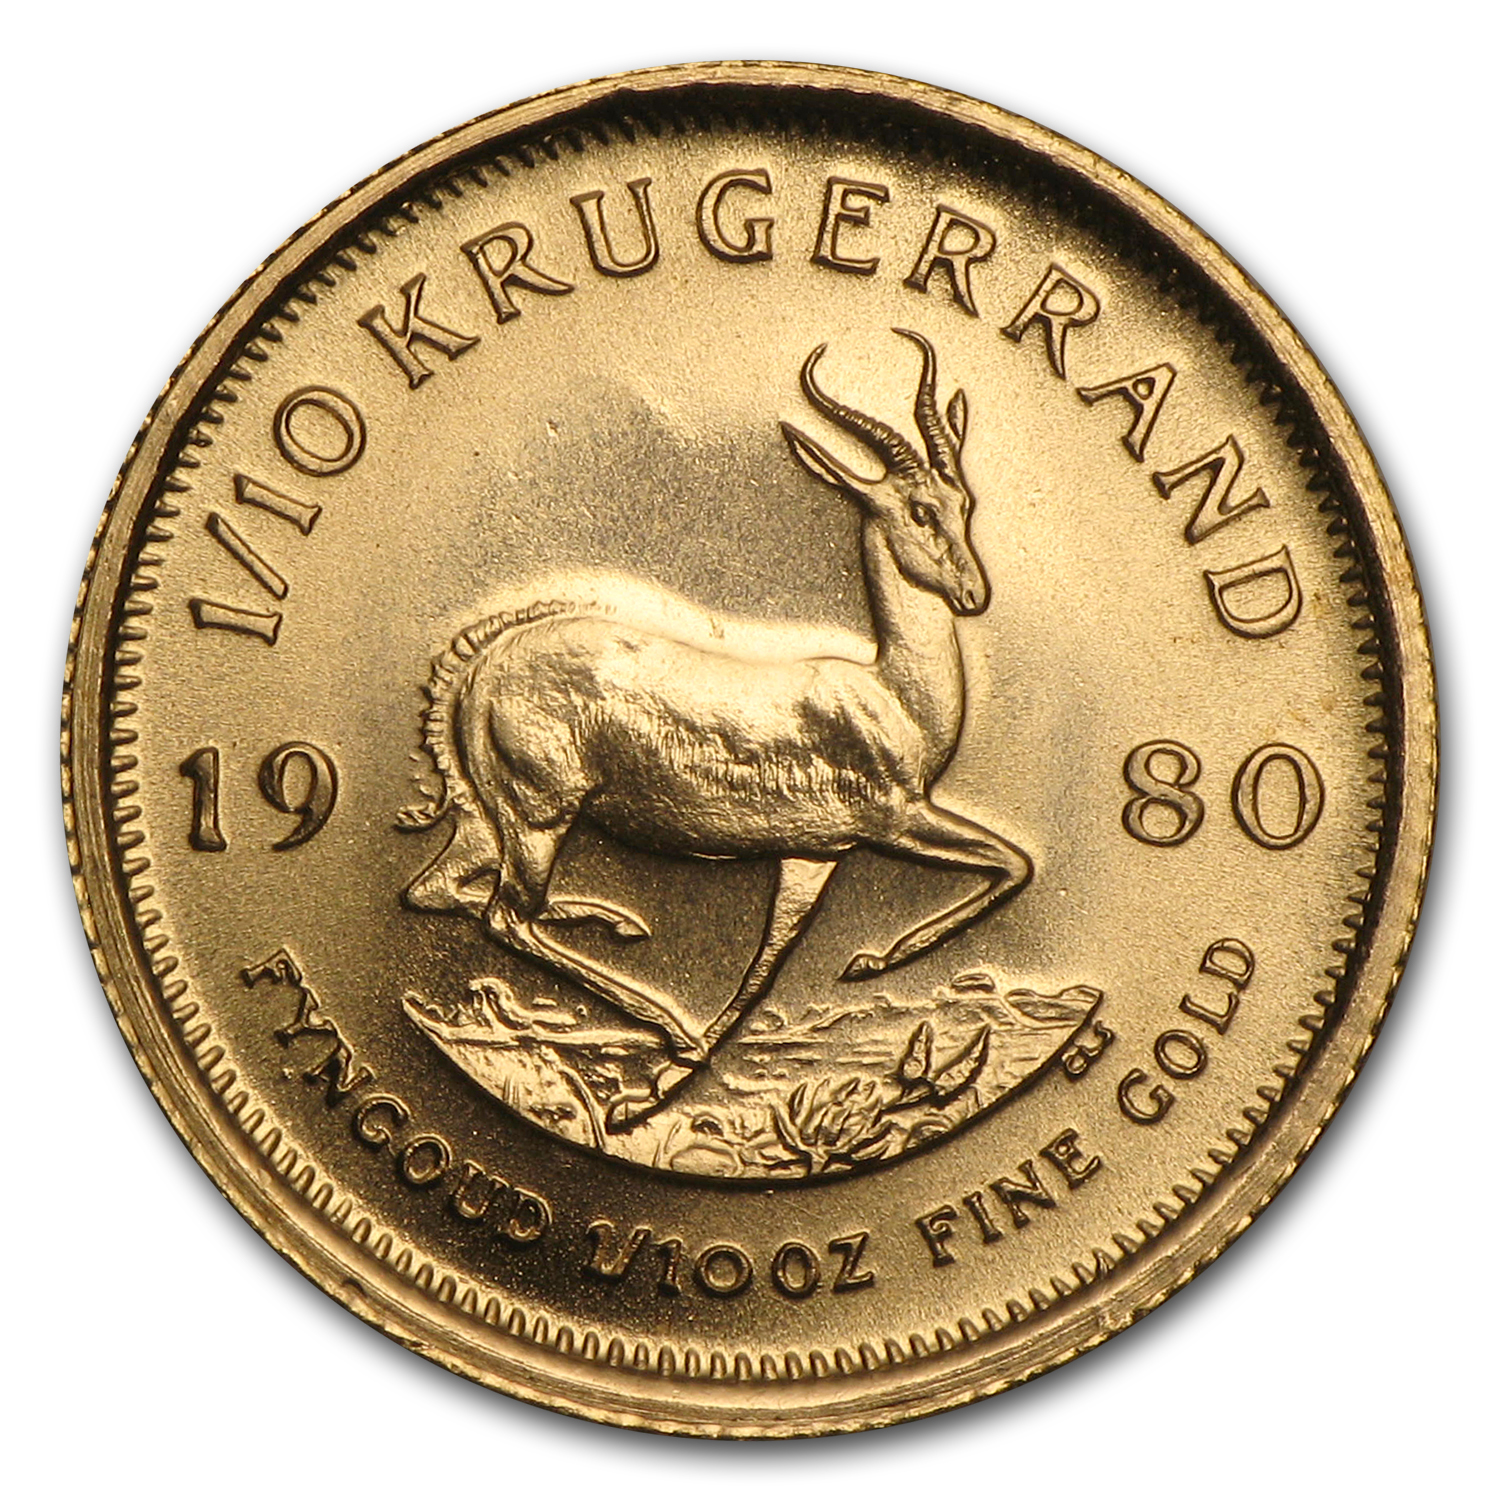 1980 AS SHOWN SOUTH AFRICA GOLD 1/10 OZ KRUGERRAND-GREAT BULLION COIN FOR PRICE